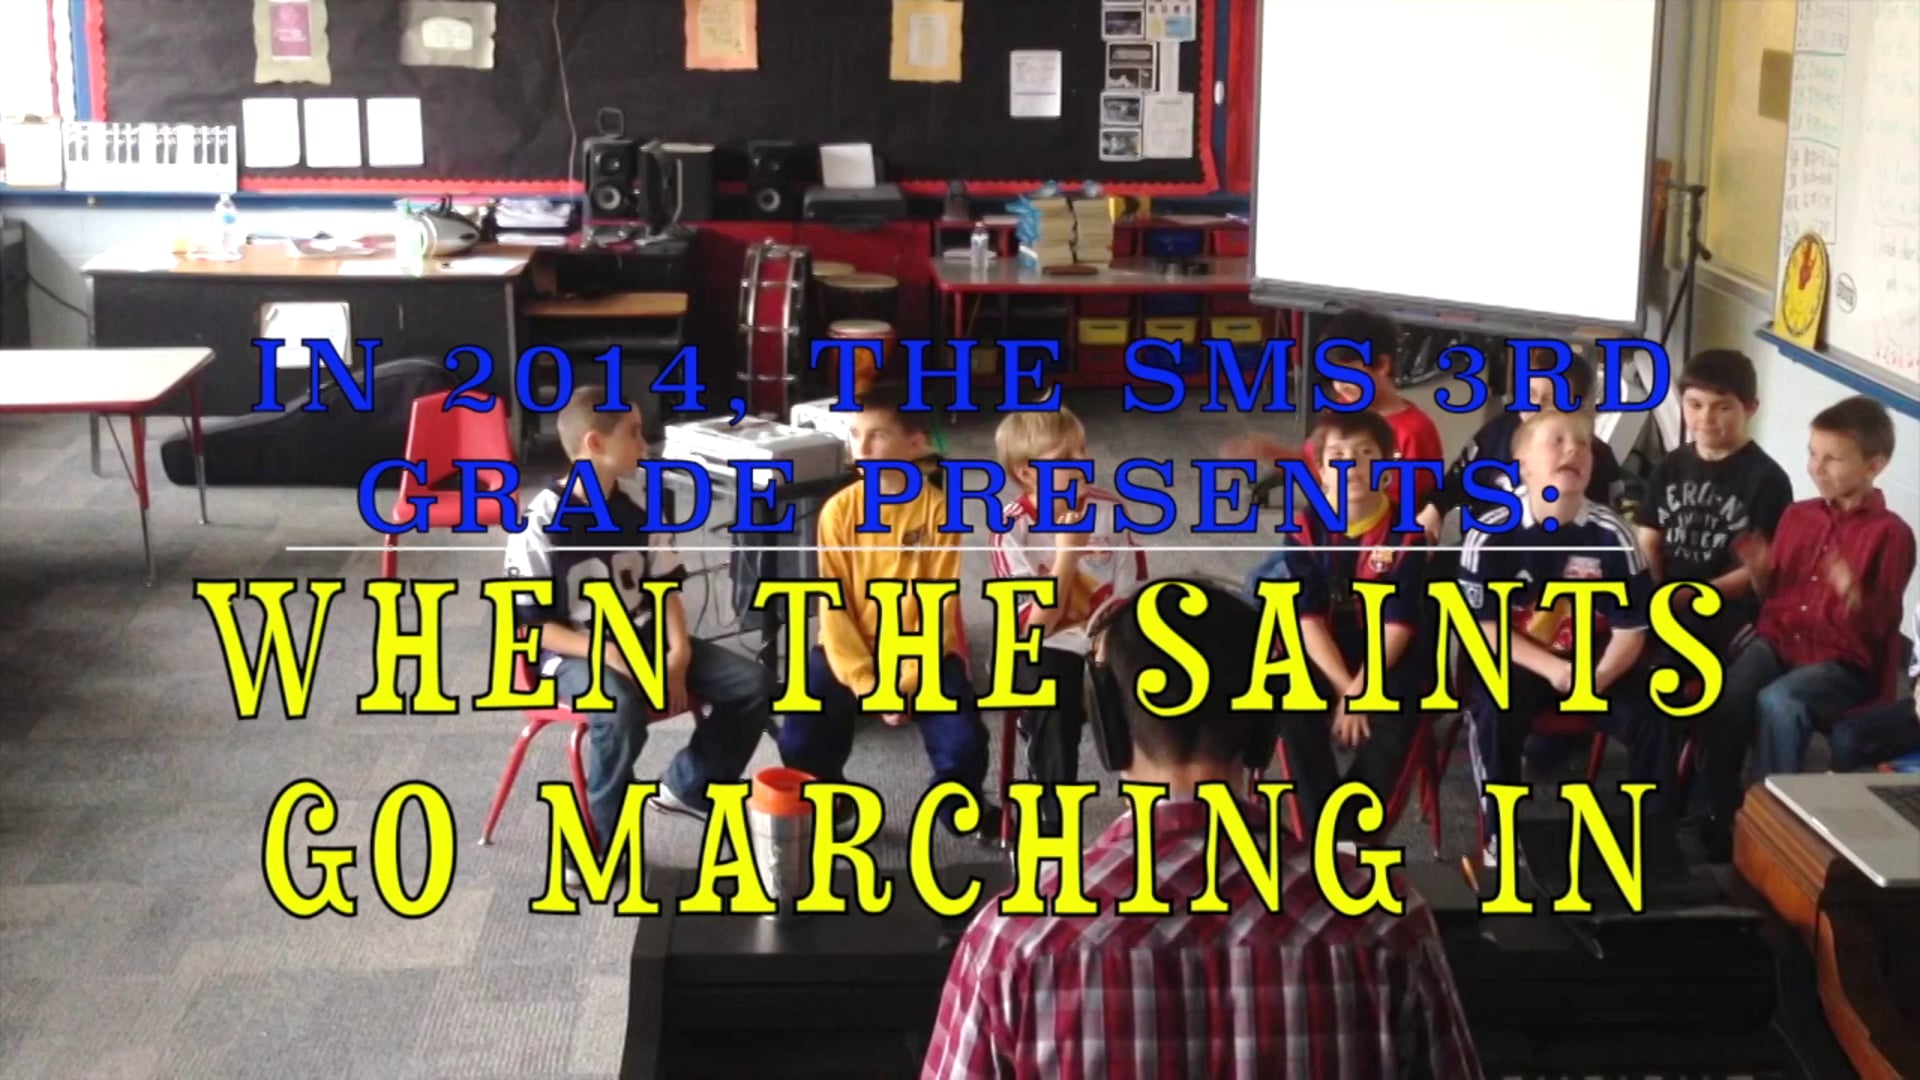 "When The Saints Go Marching In" - SMS 3rd Grade